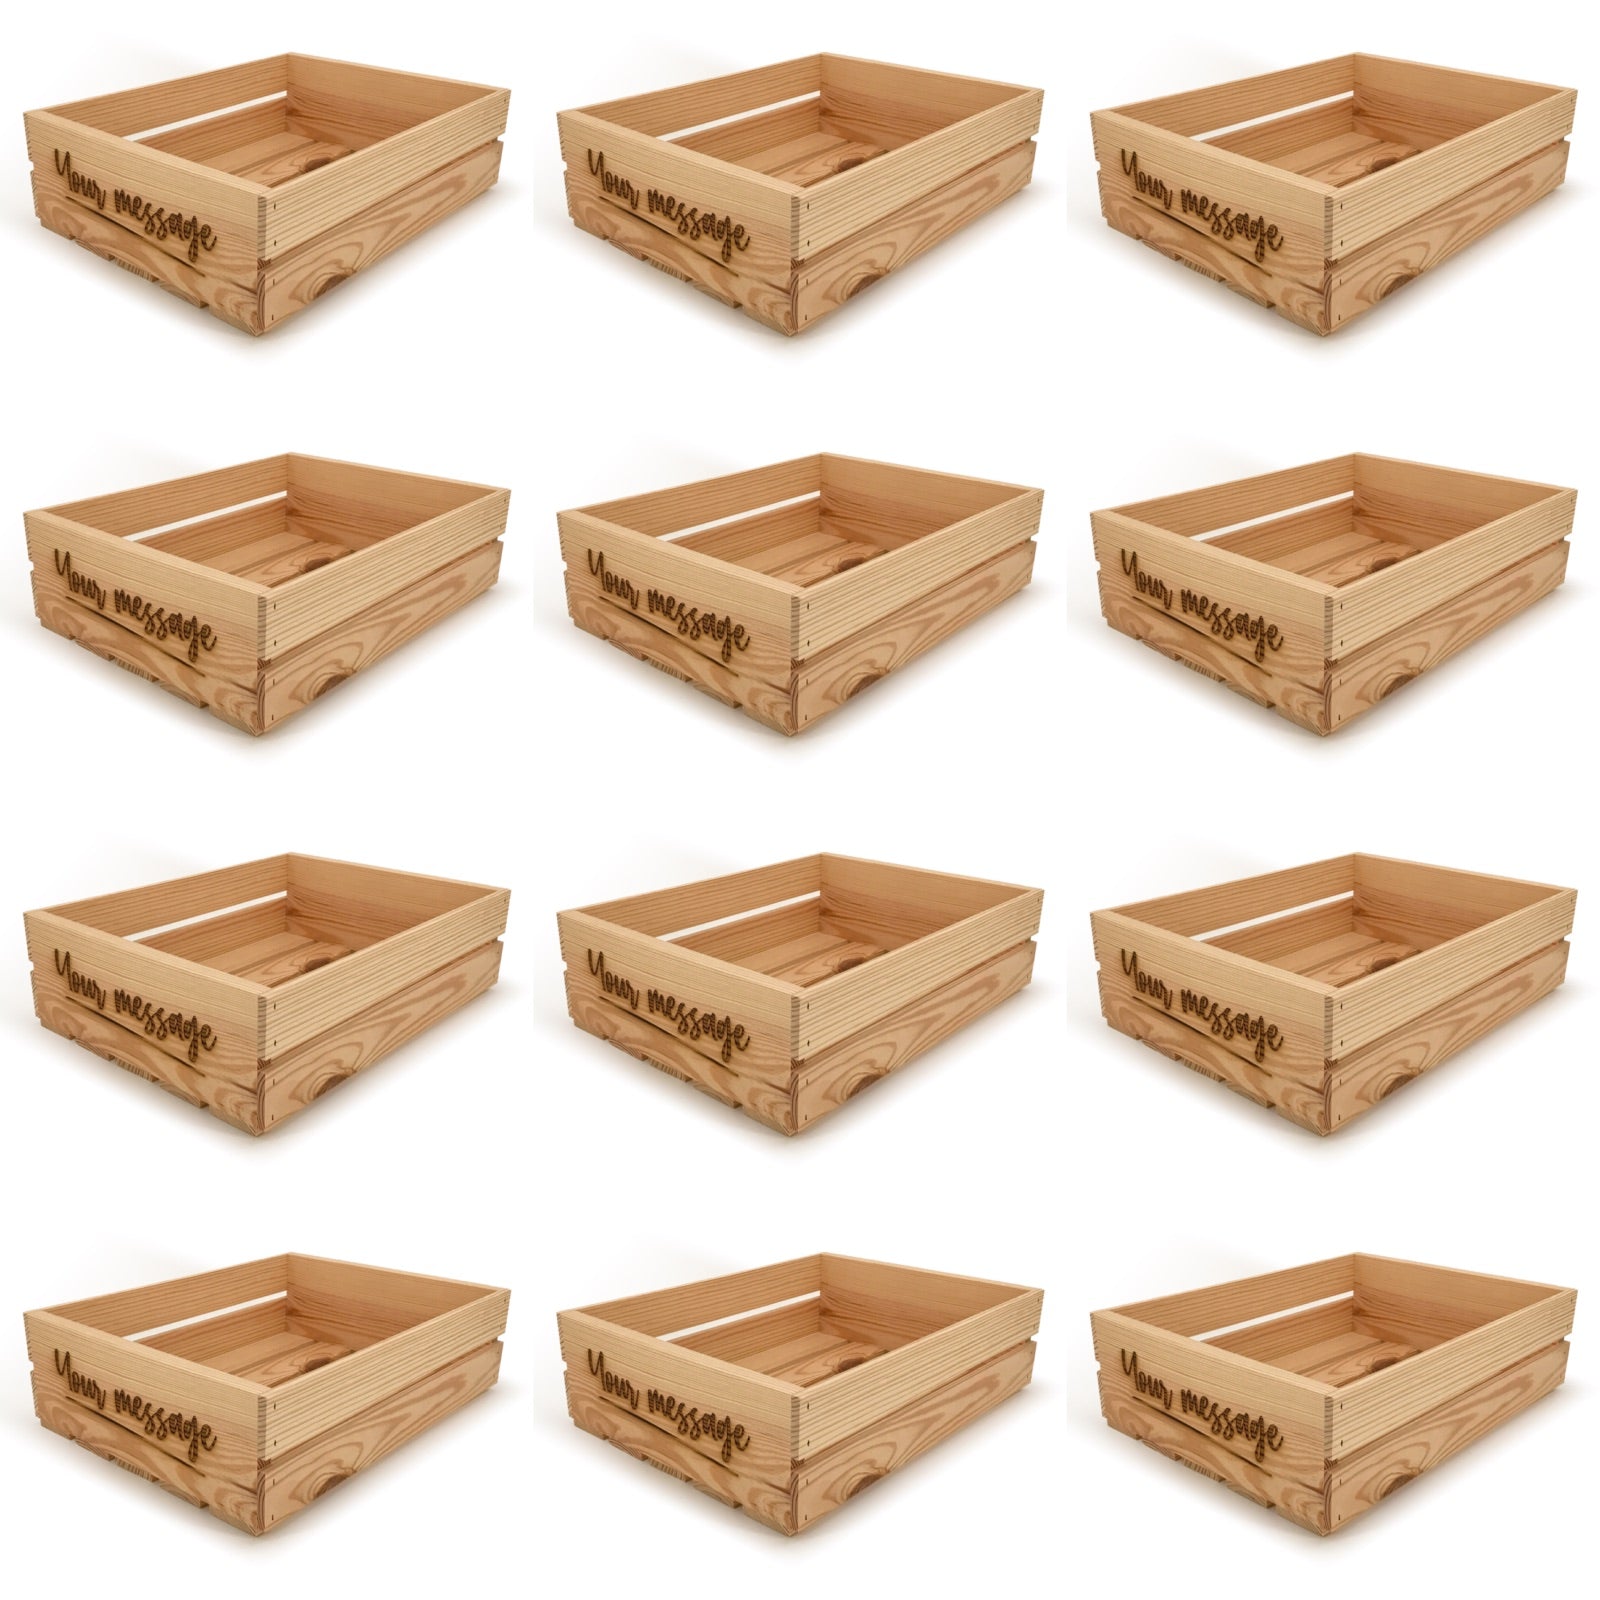 12 Small wooden crates with custom message 18x14x5.25, 6-WS-18-14-5.25-ST-NW-NL, 12-WS-18-14-5.25-ST-NW-NL, 24-WS-18-14-5.25-ST-NW-NL, 48-WS-18-14-5.25-ST-NW-NL, 96-WS-18-14-5.25-ST-NW-NL